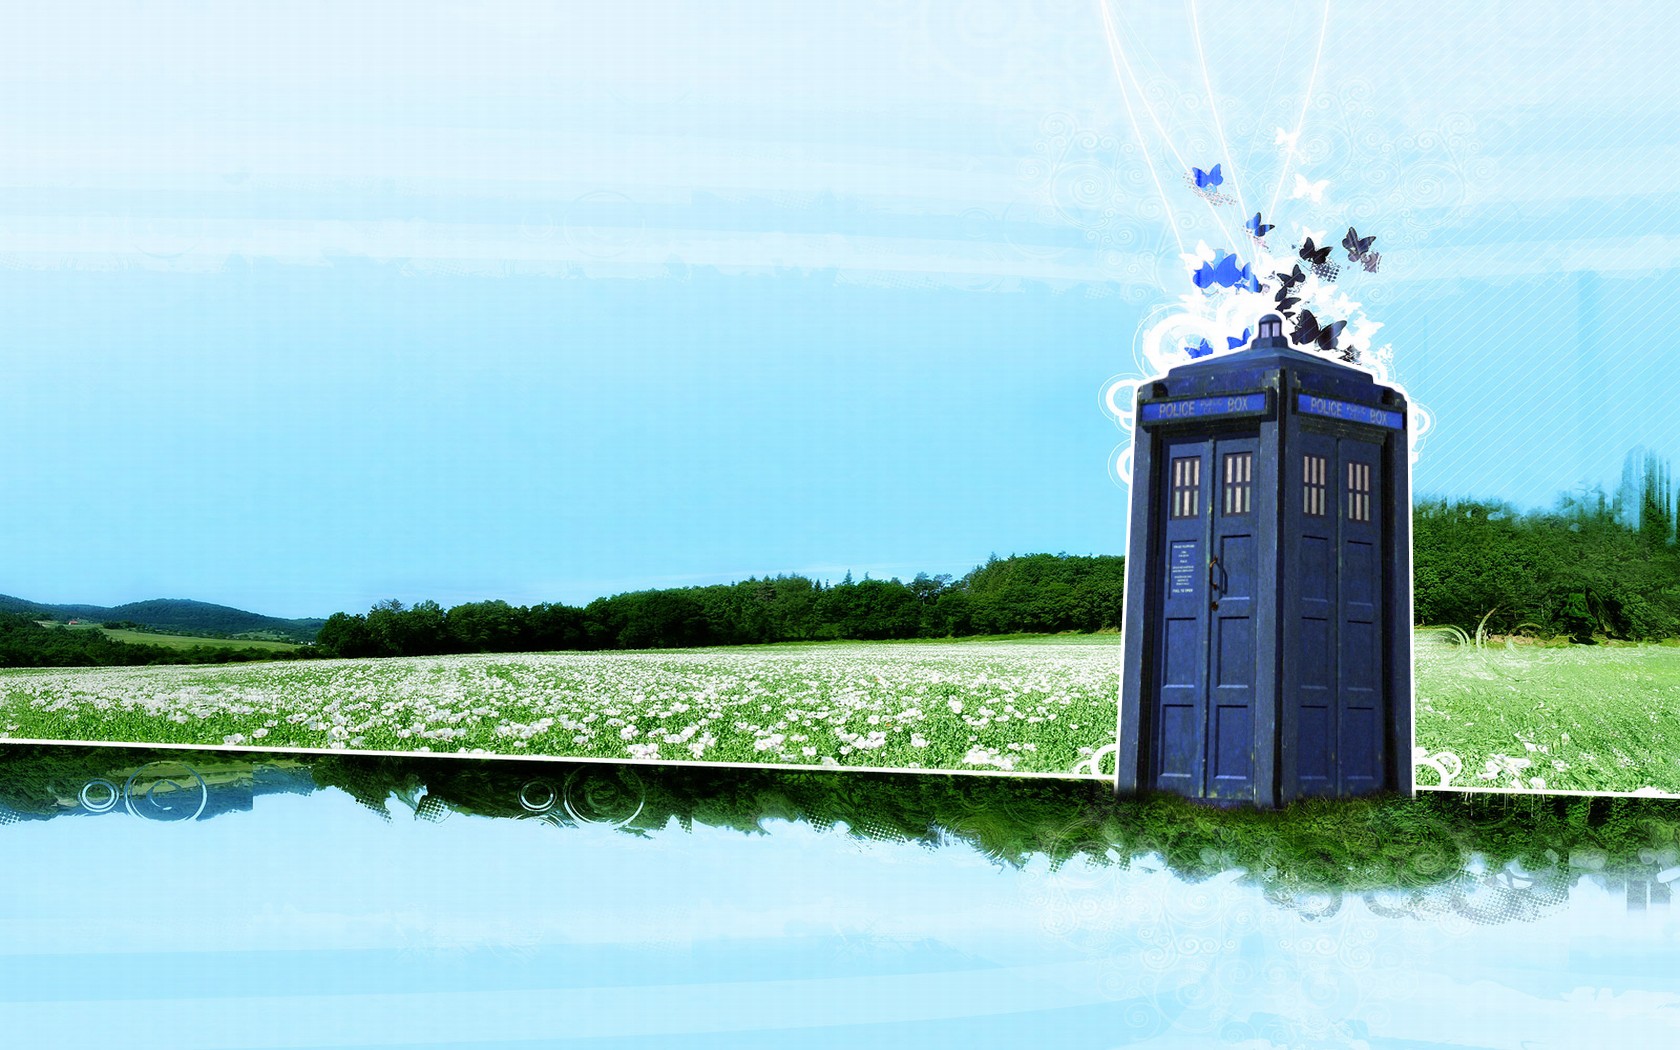 General 1680x1050 TARDIS TV series Doctor Who science fiction